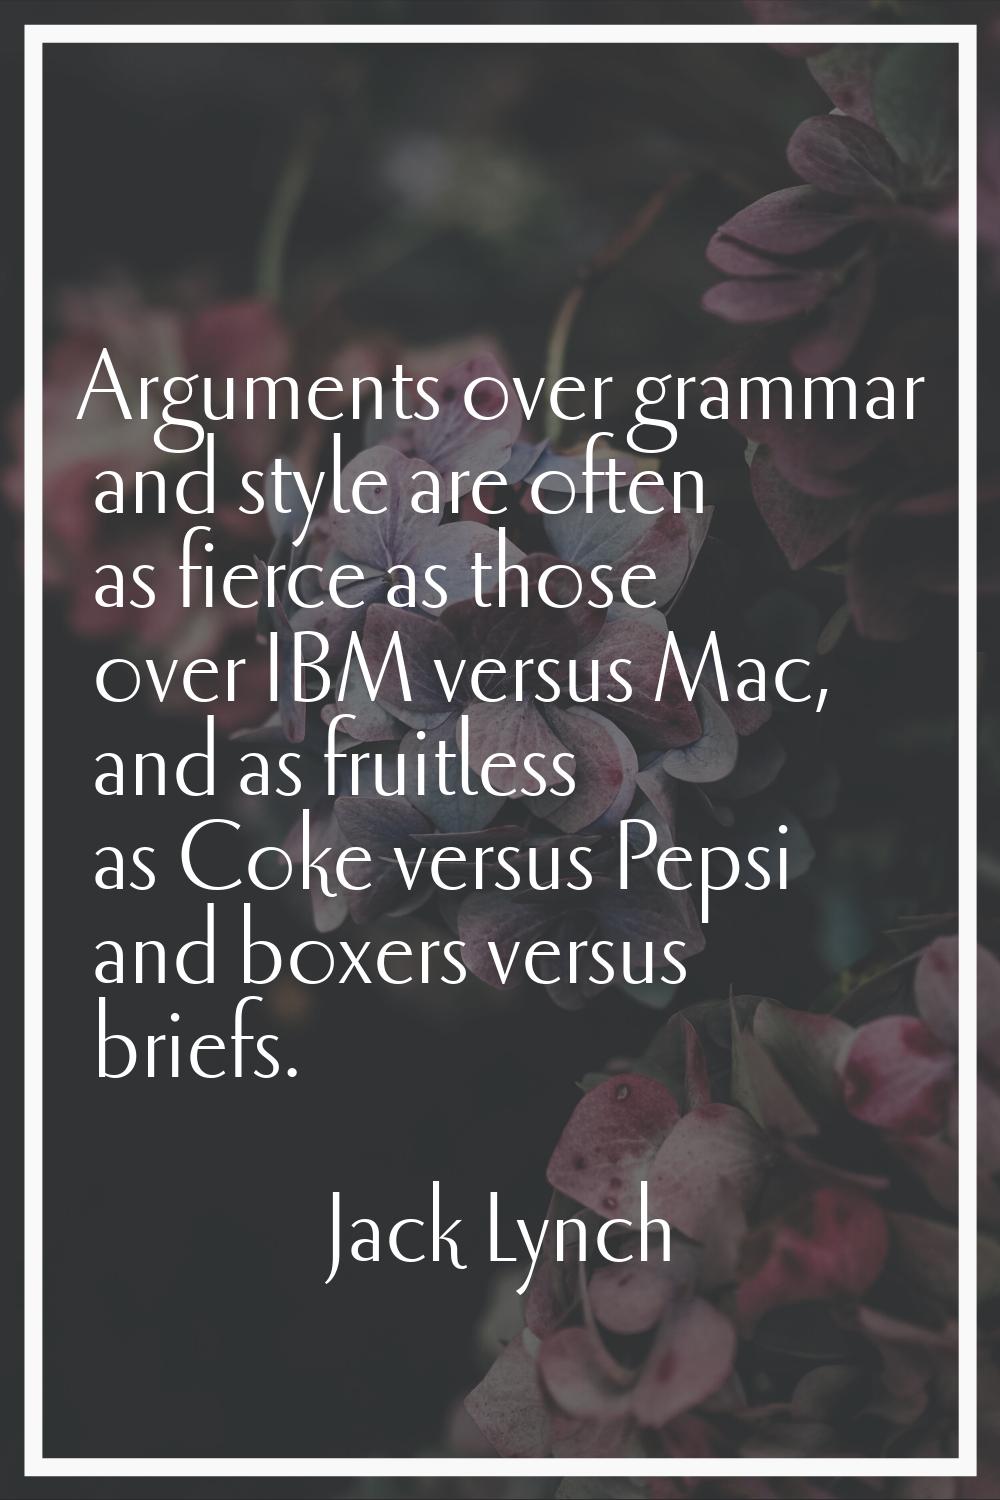 Arguments over grammar and style are often as fierce as those over IBM versus Mac, and as fruitless